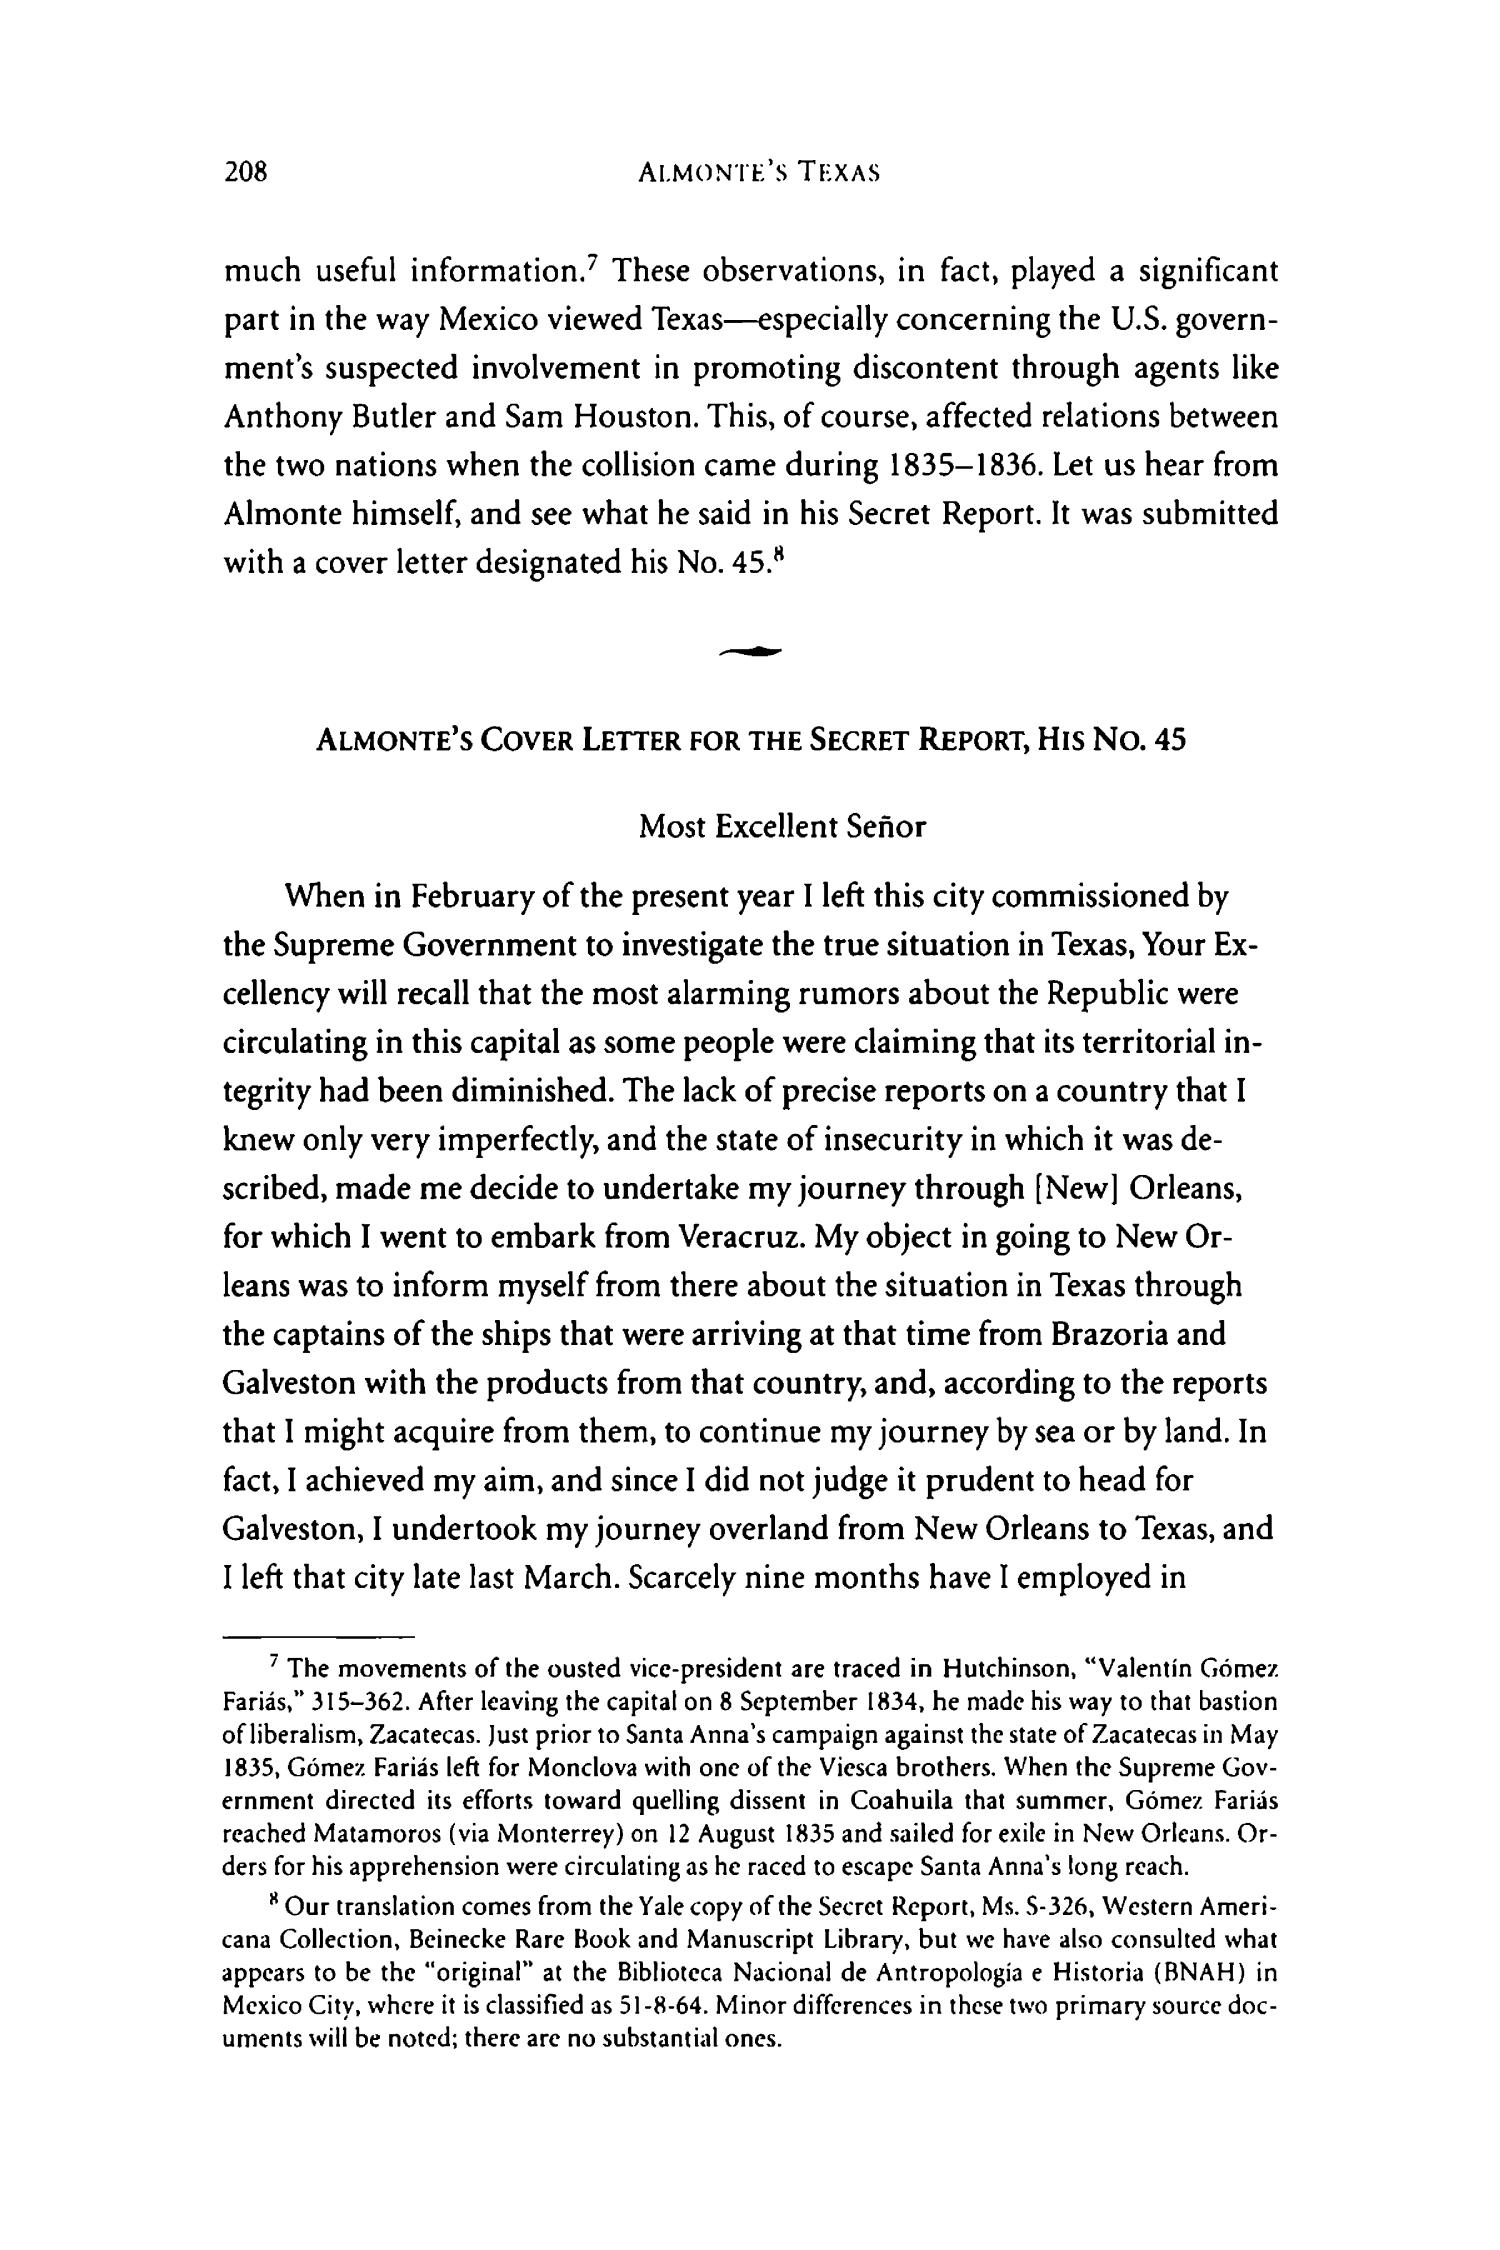 Almonte's Texas: Juan N. Almonte's 1834 Inspection, Secret Report & Role in the 1836 Campaign
                                                
                                                    208
                                                